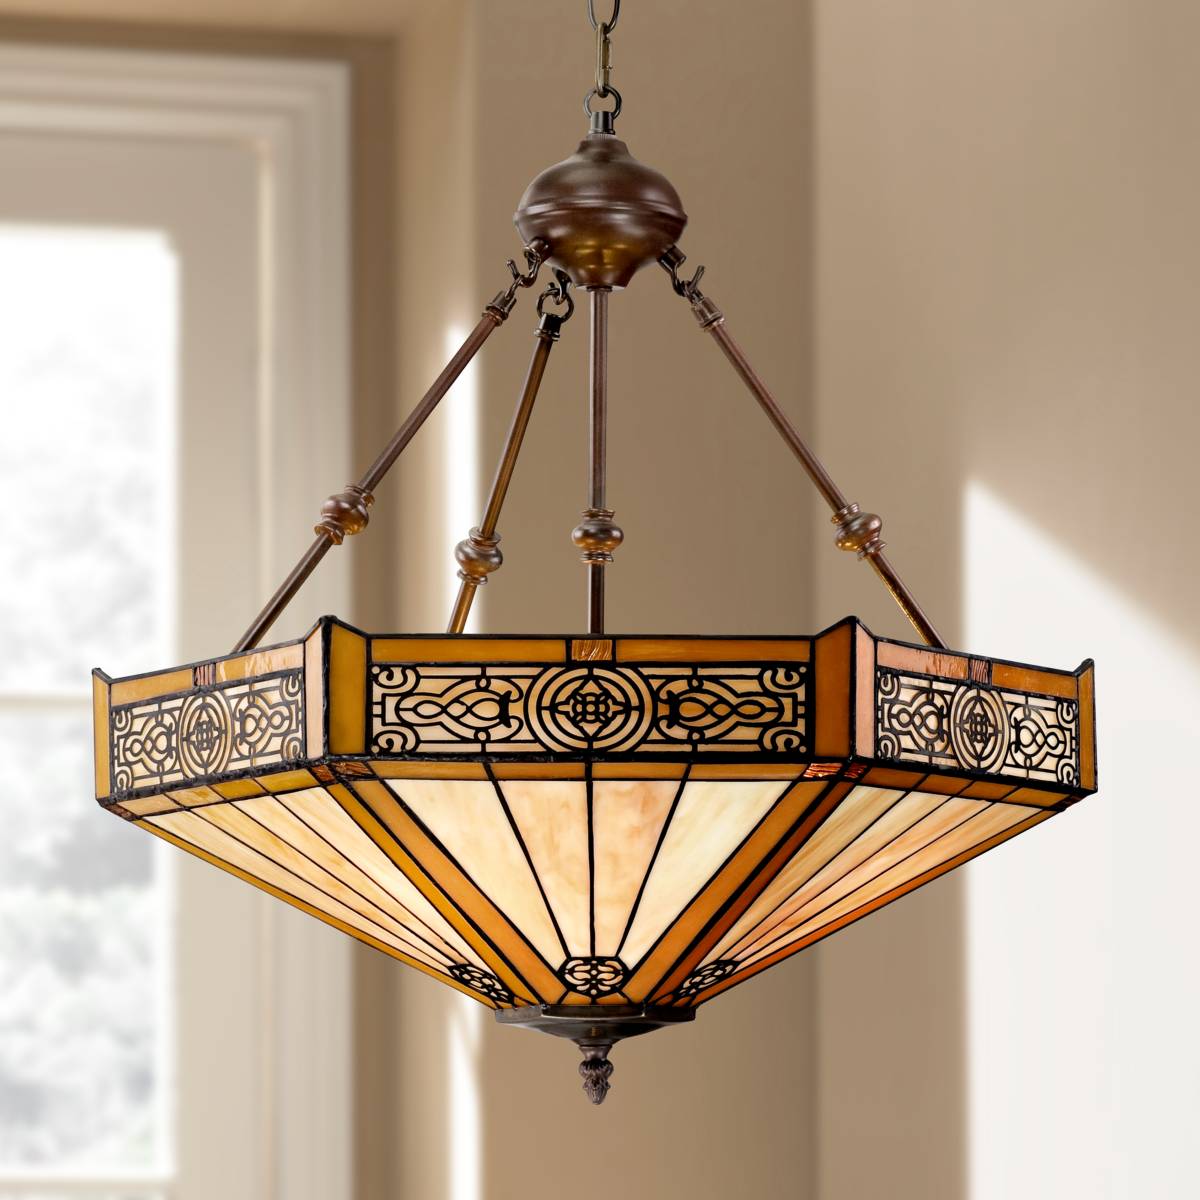 Tiffany Chandeliers - Stained Glass Tiffany Chandelier Designs | Lamps Plus